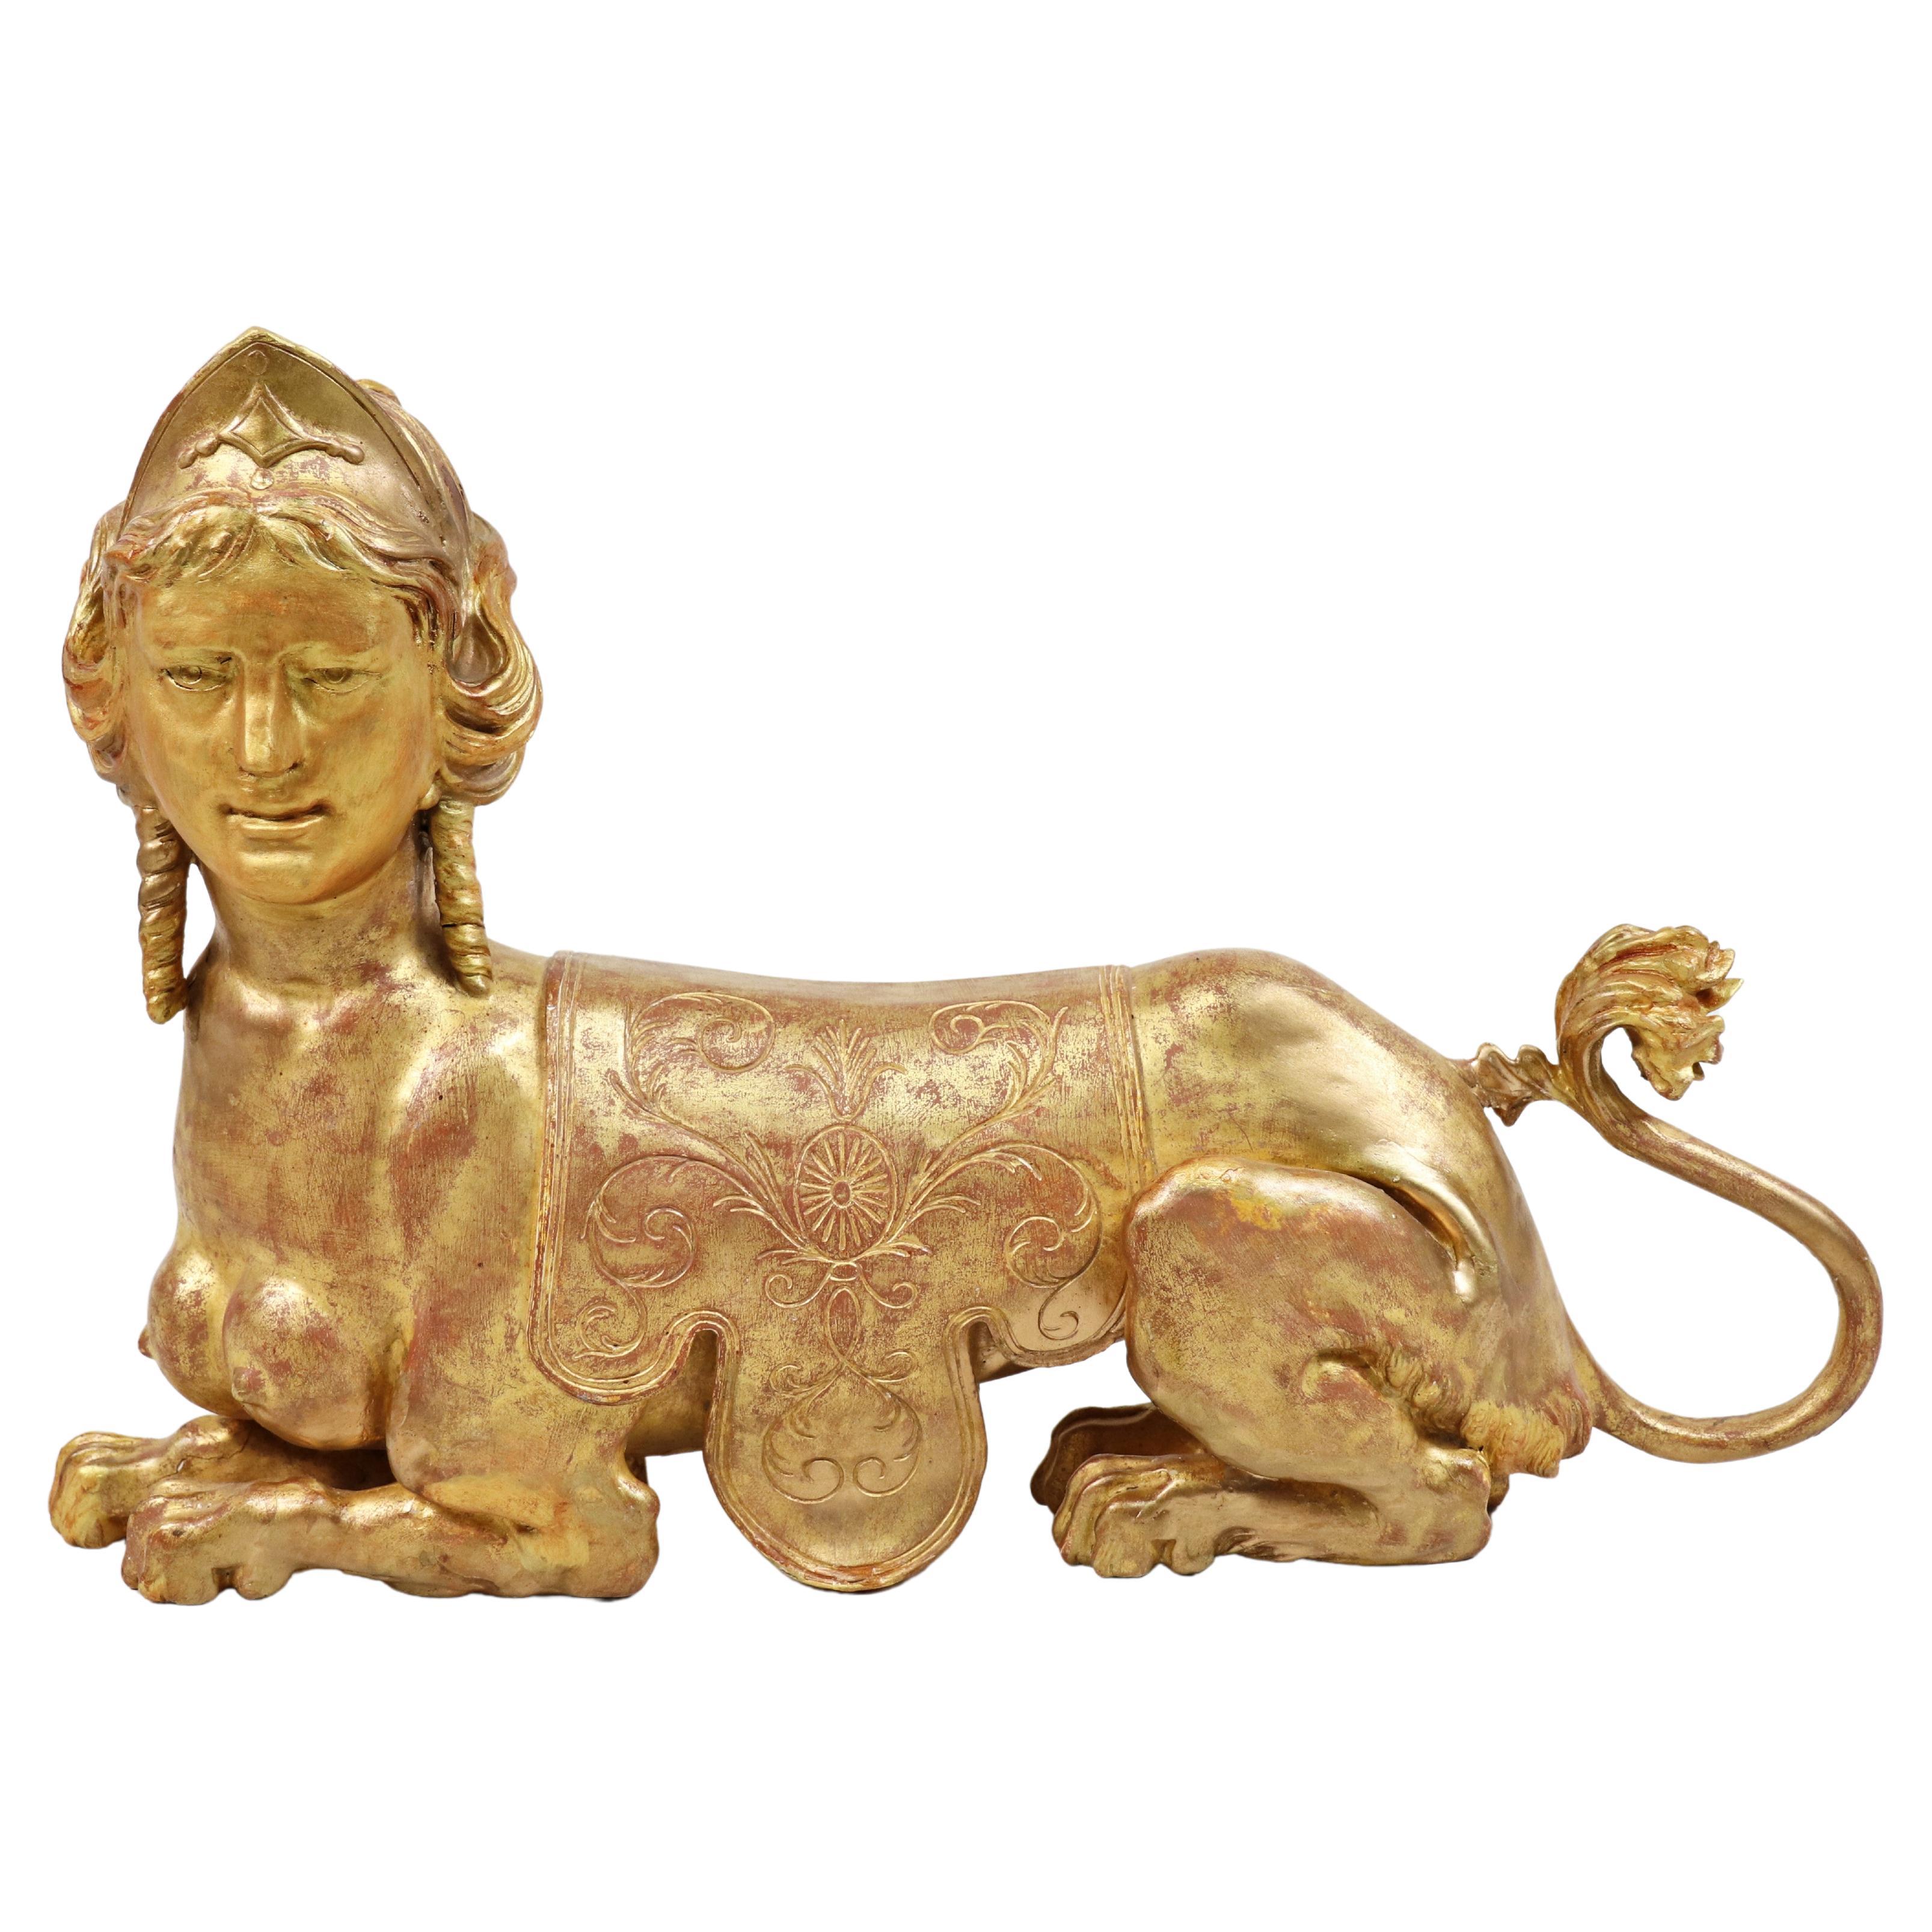 Early 19th Century English Regency Greek Revival Gilt Carving of a Sphinx For Sale